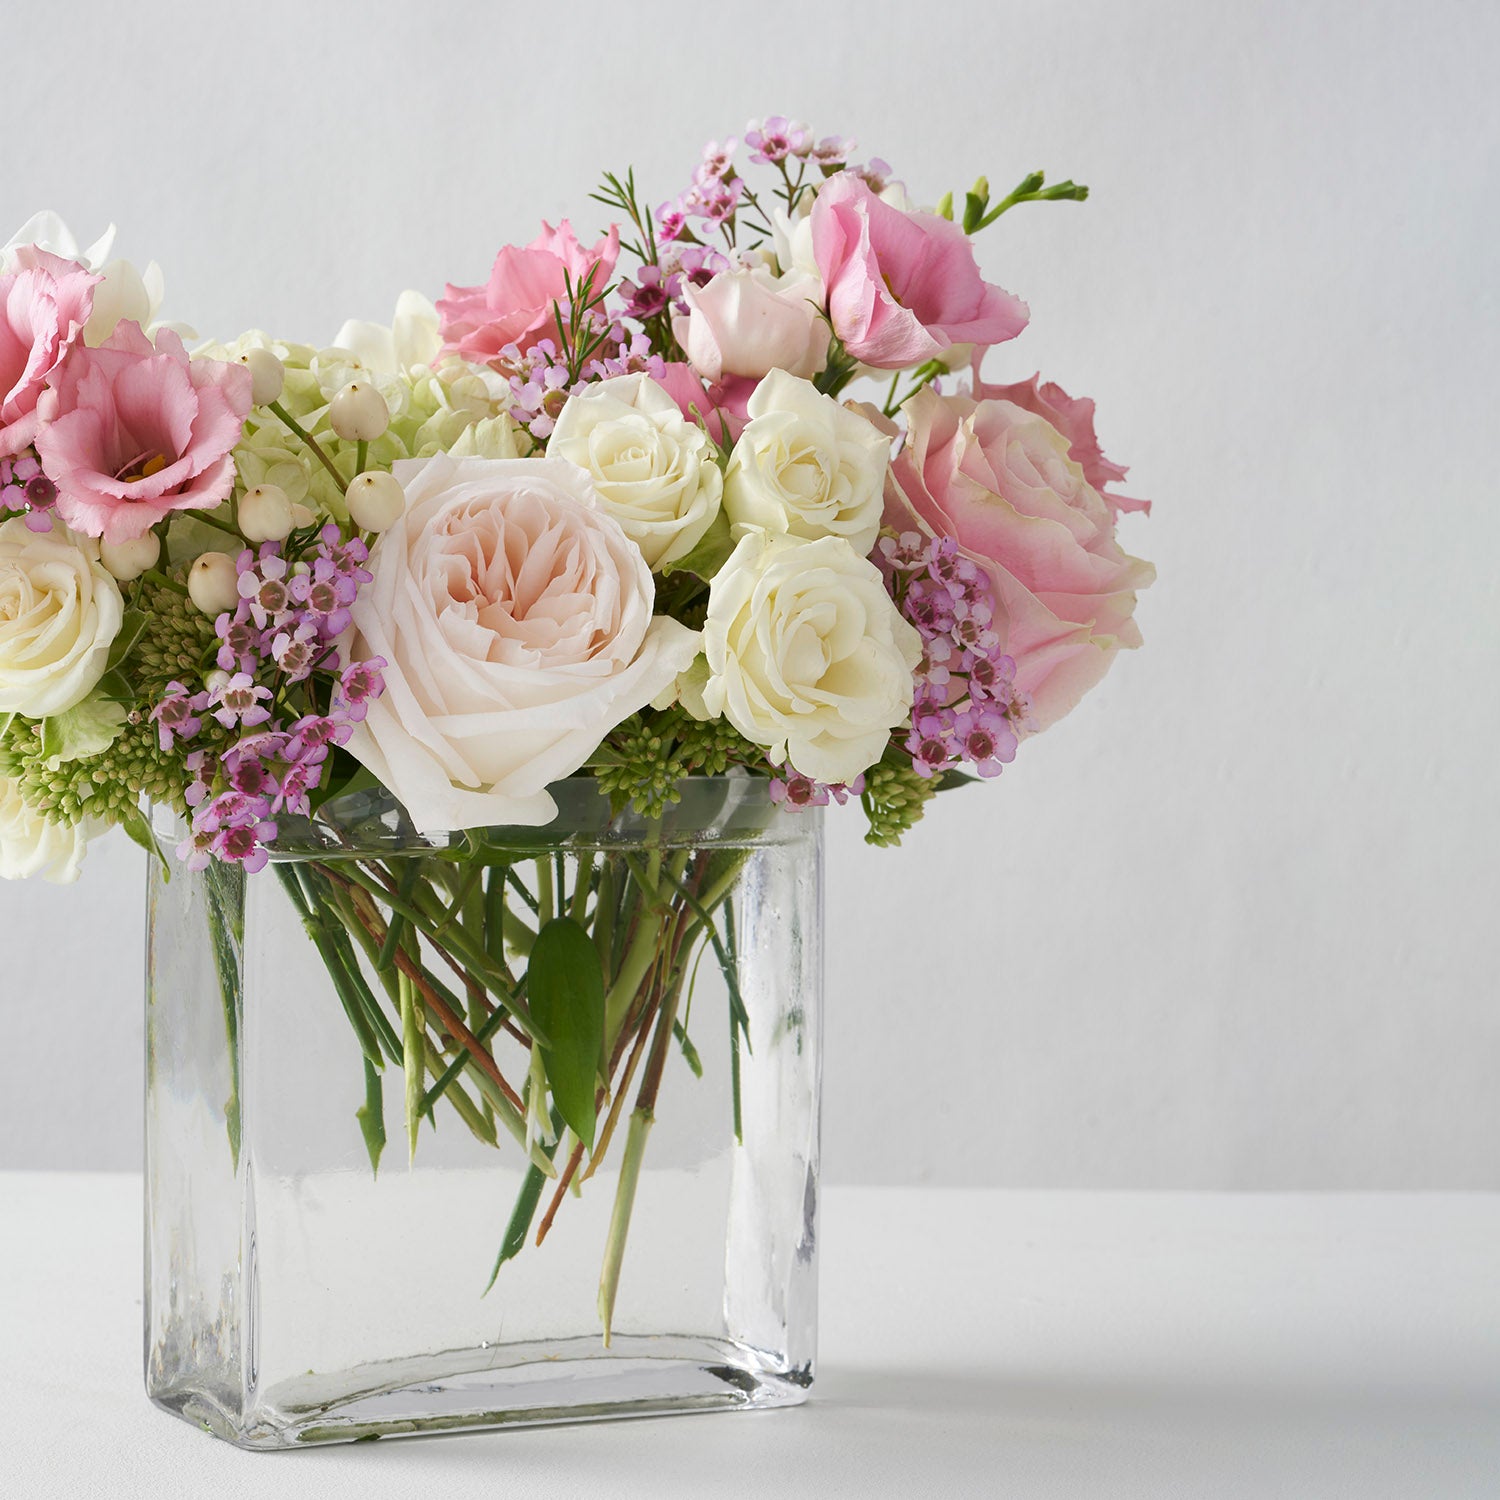 Rectangular glass vase filled with a mixture of soft pink flowers.